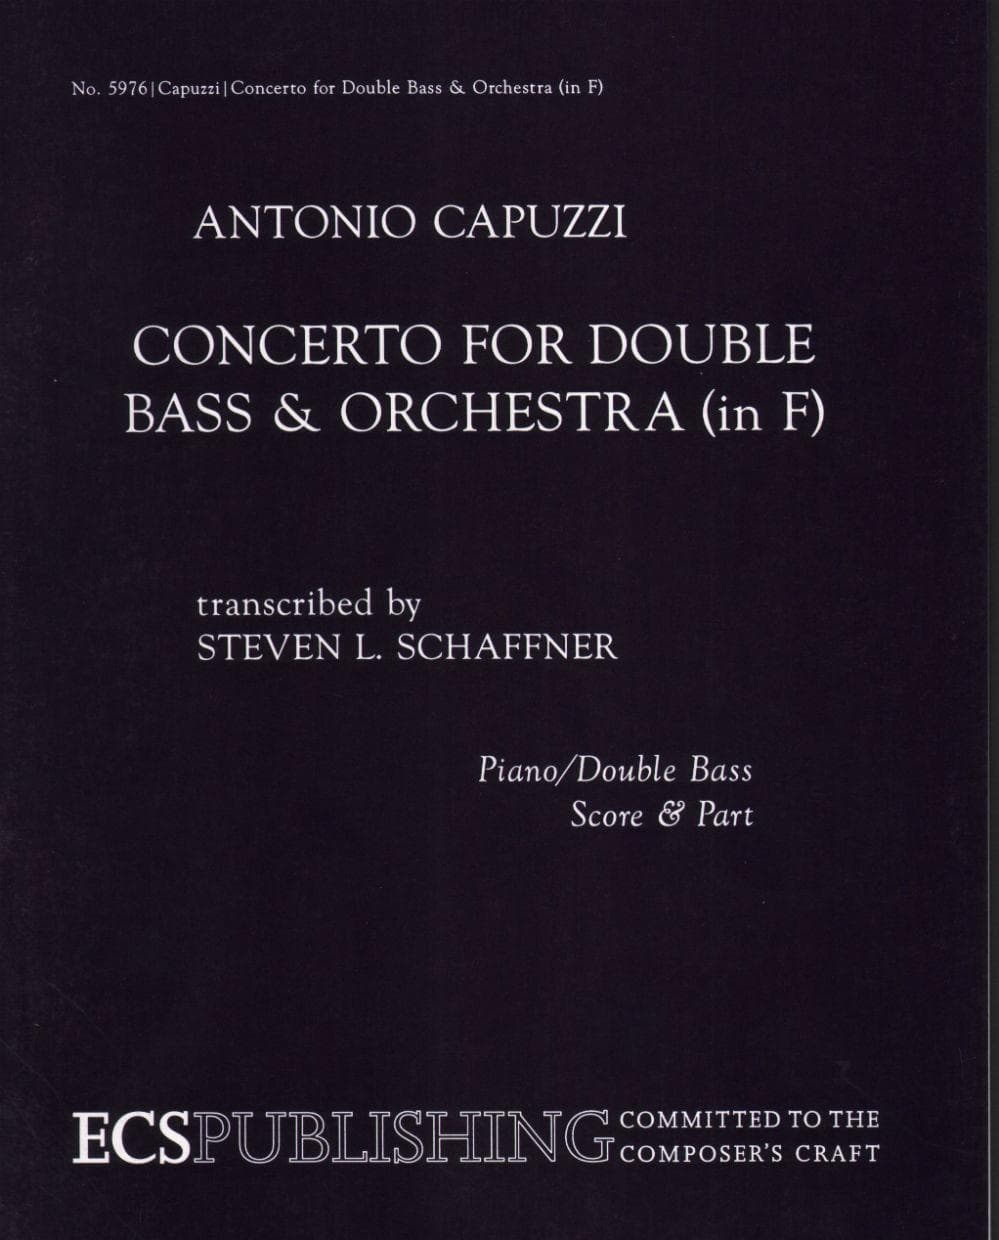 Capuzzi, Antonio - Concerto in F for Double Bass - Edited by Schaffner and Riccardi - ECS Publishing